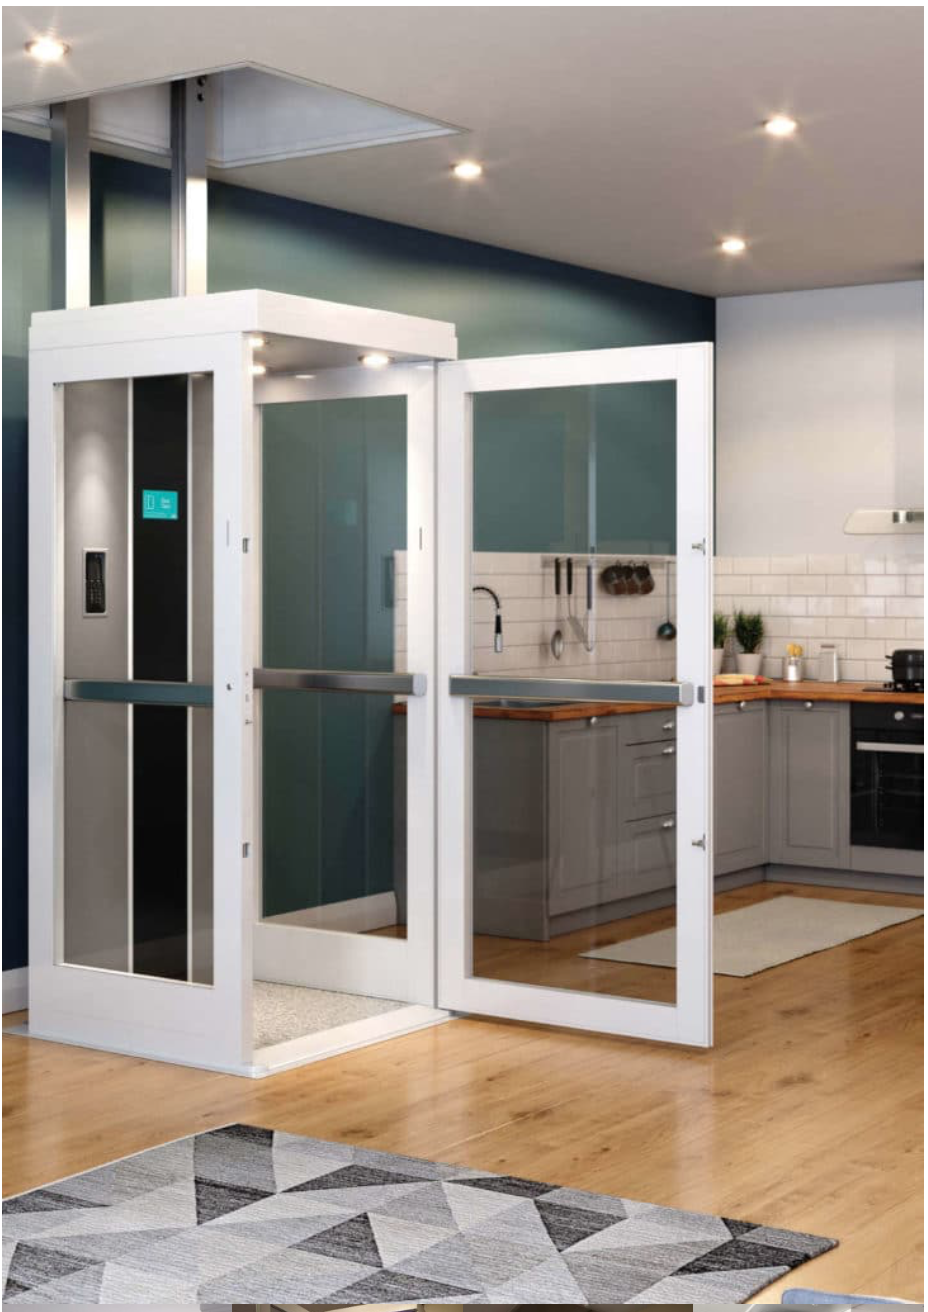 Product shot of a white and glass paneled elevator in a green walled kitchen with wood floors.